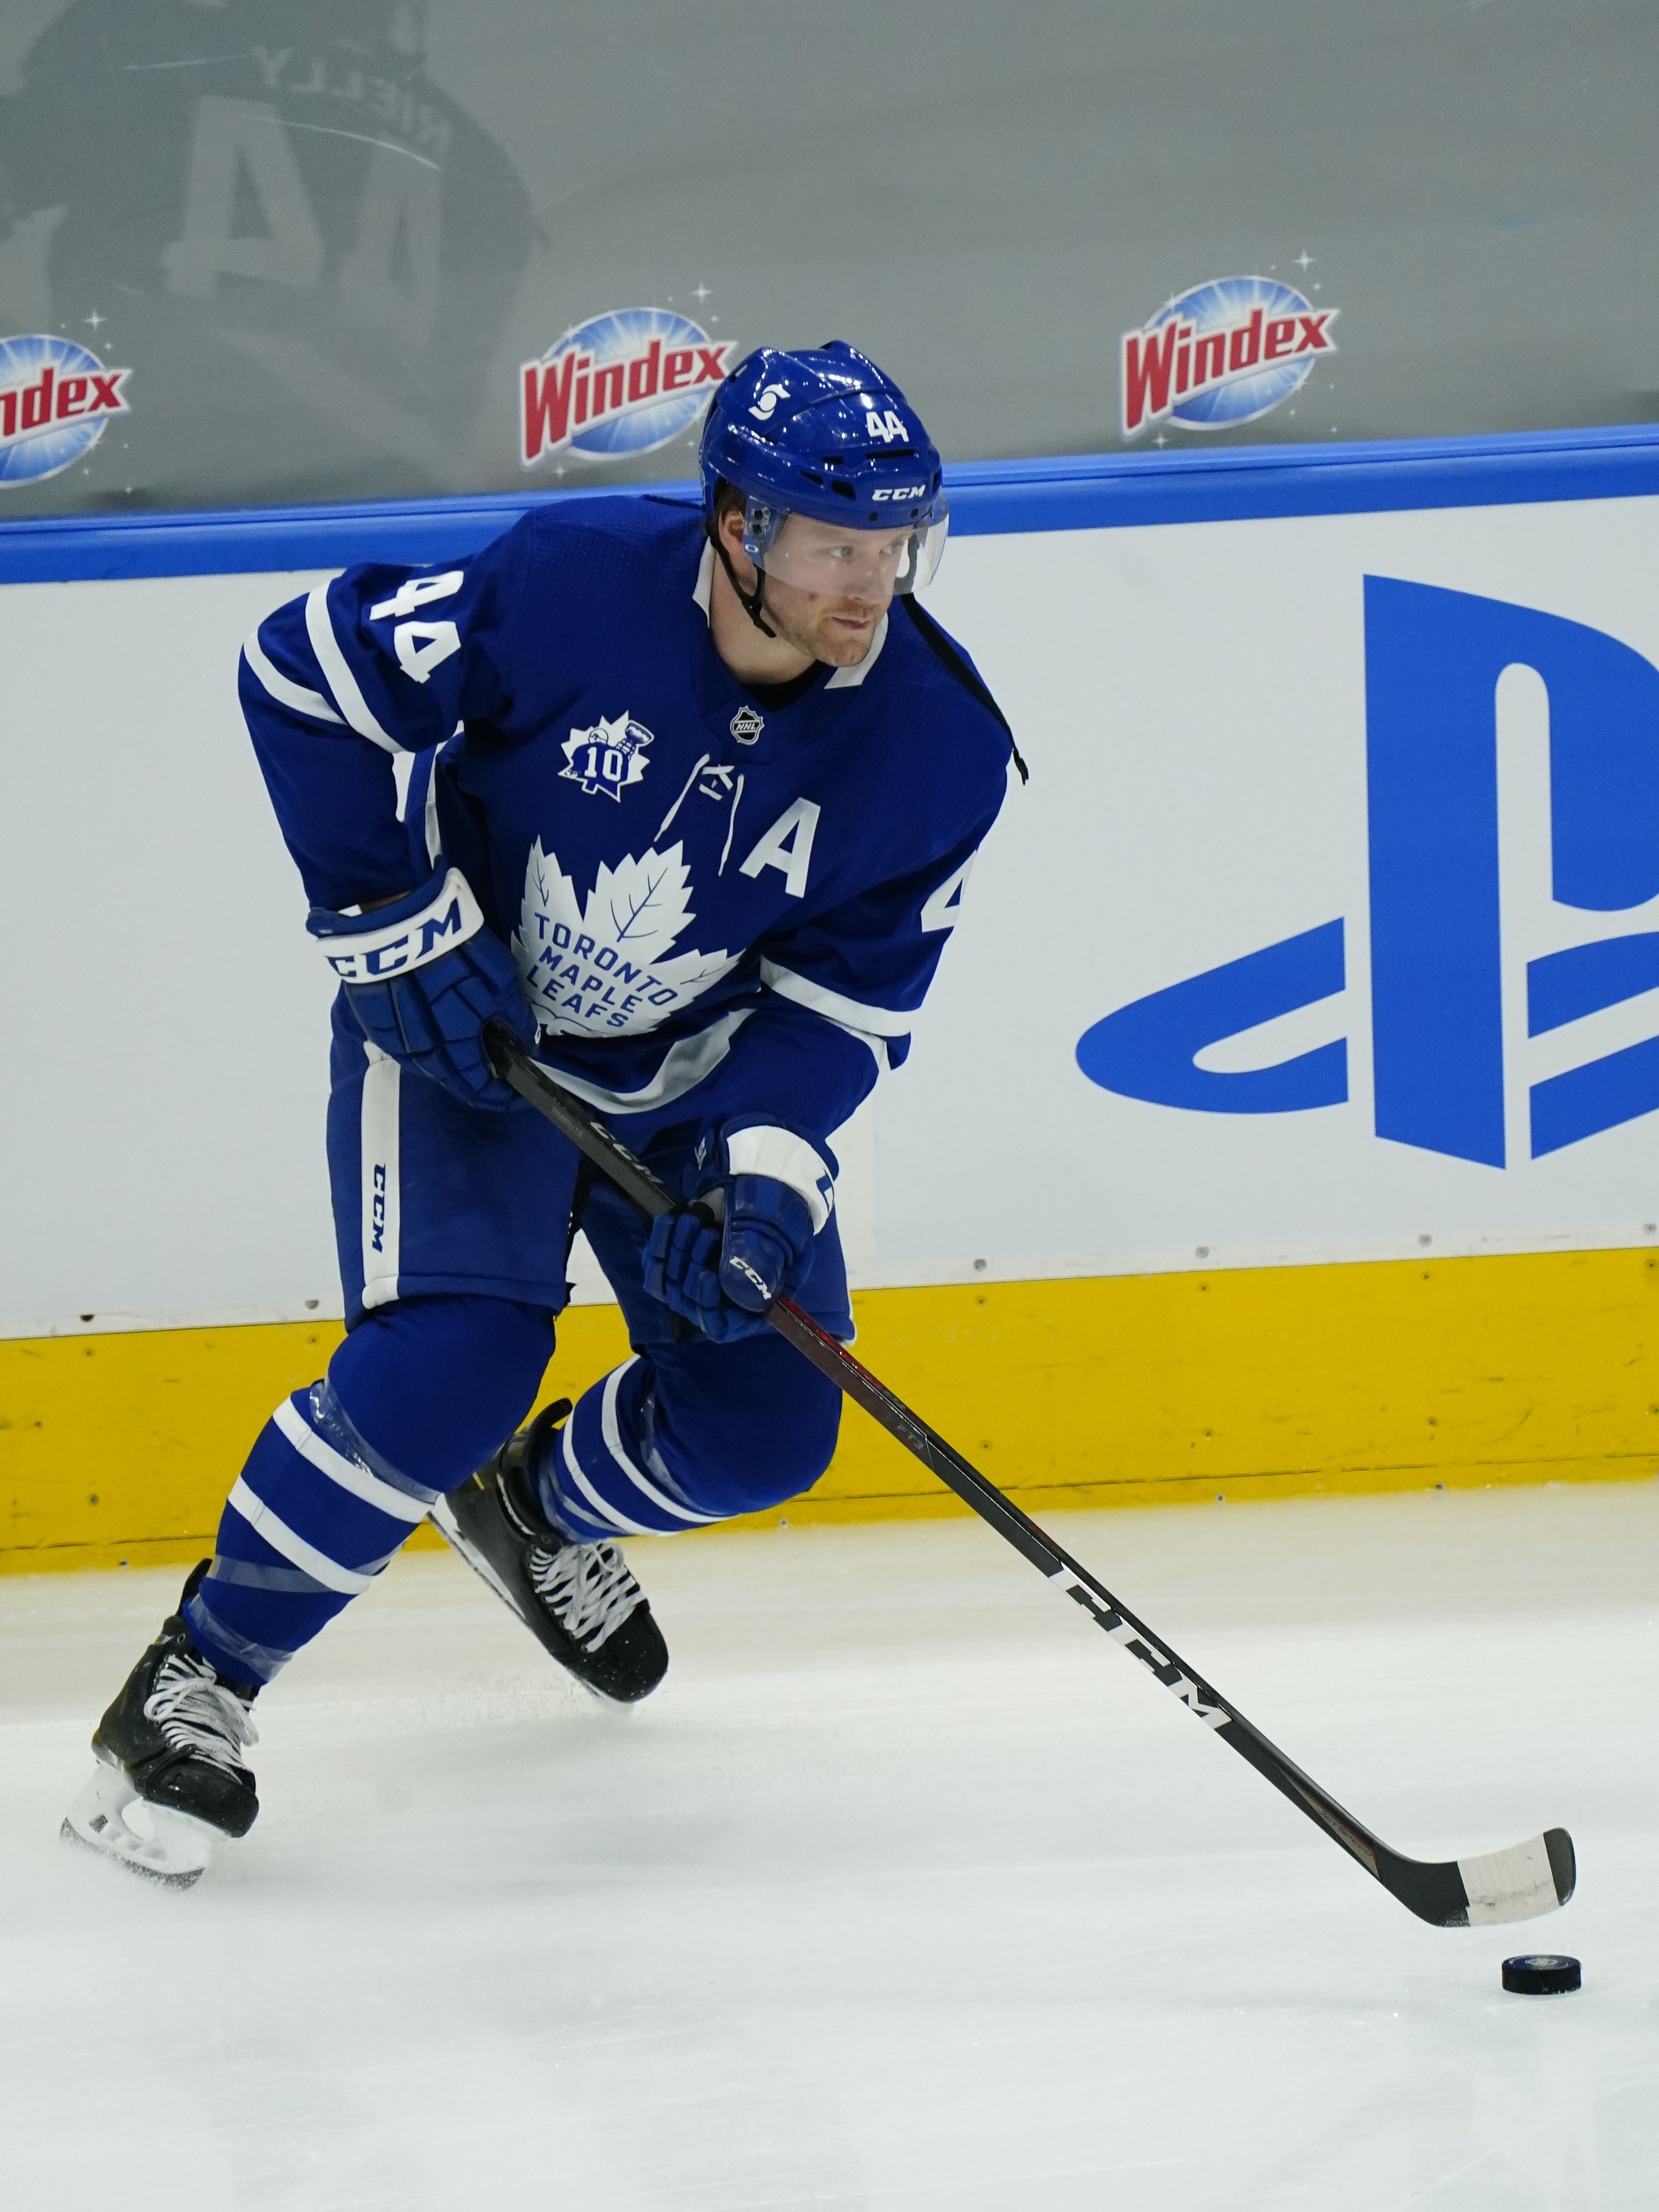 Maple Leafs figure Engvall is ready for his chance in the NHL